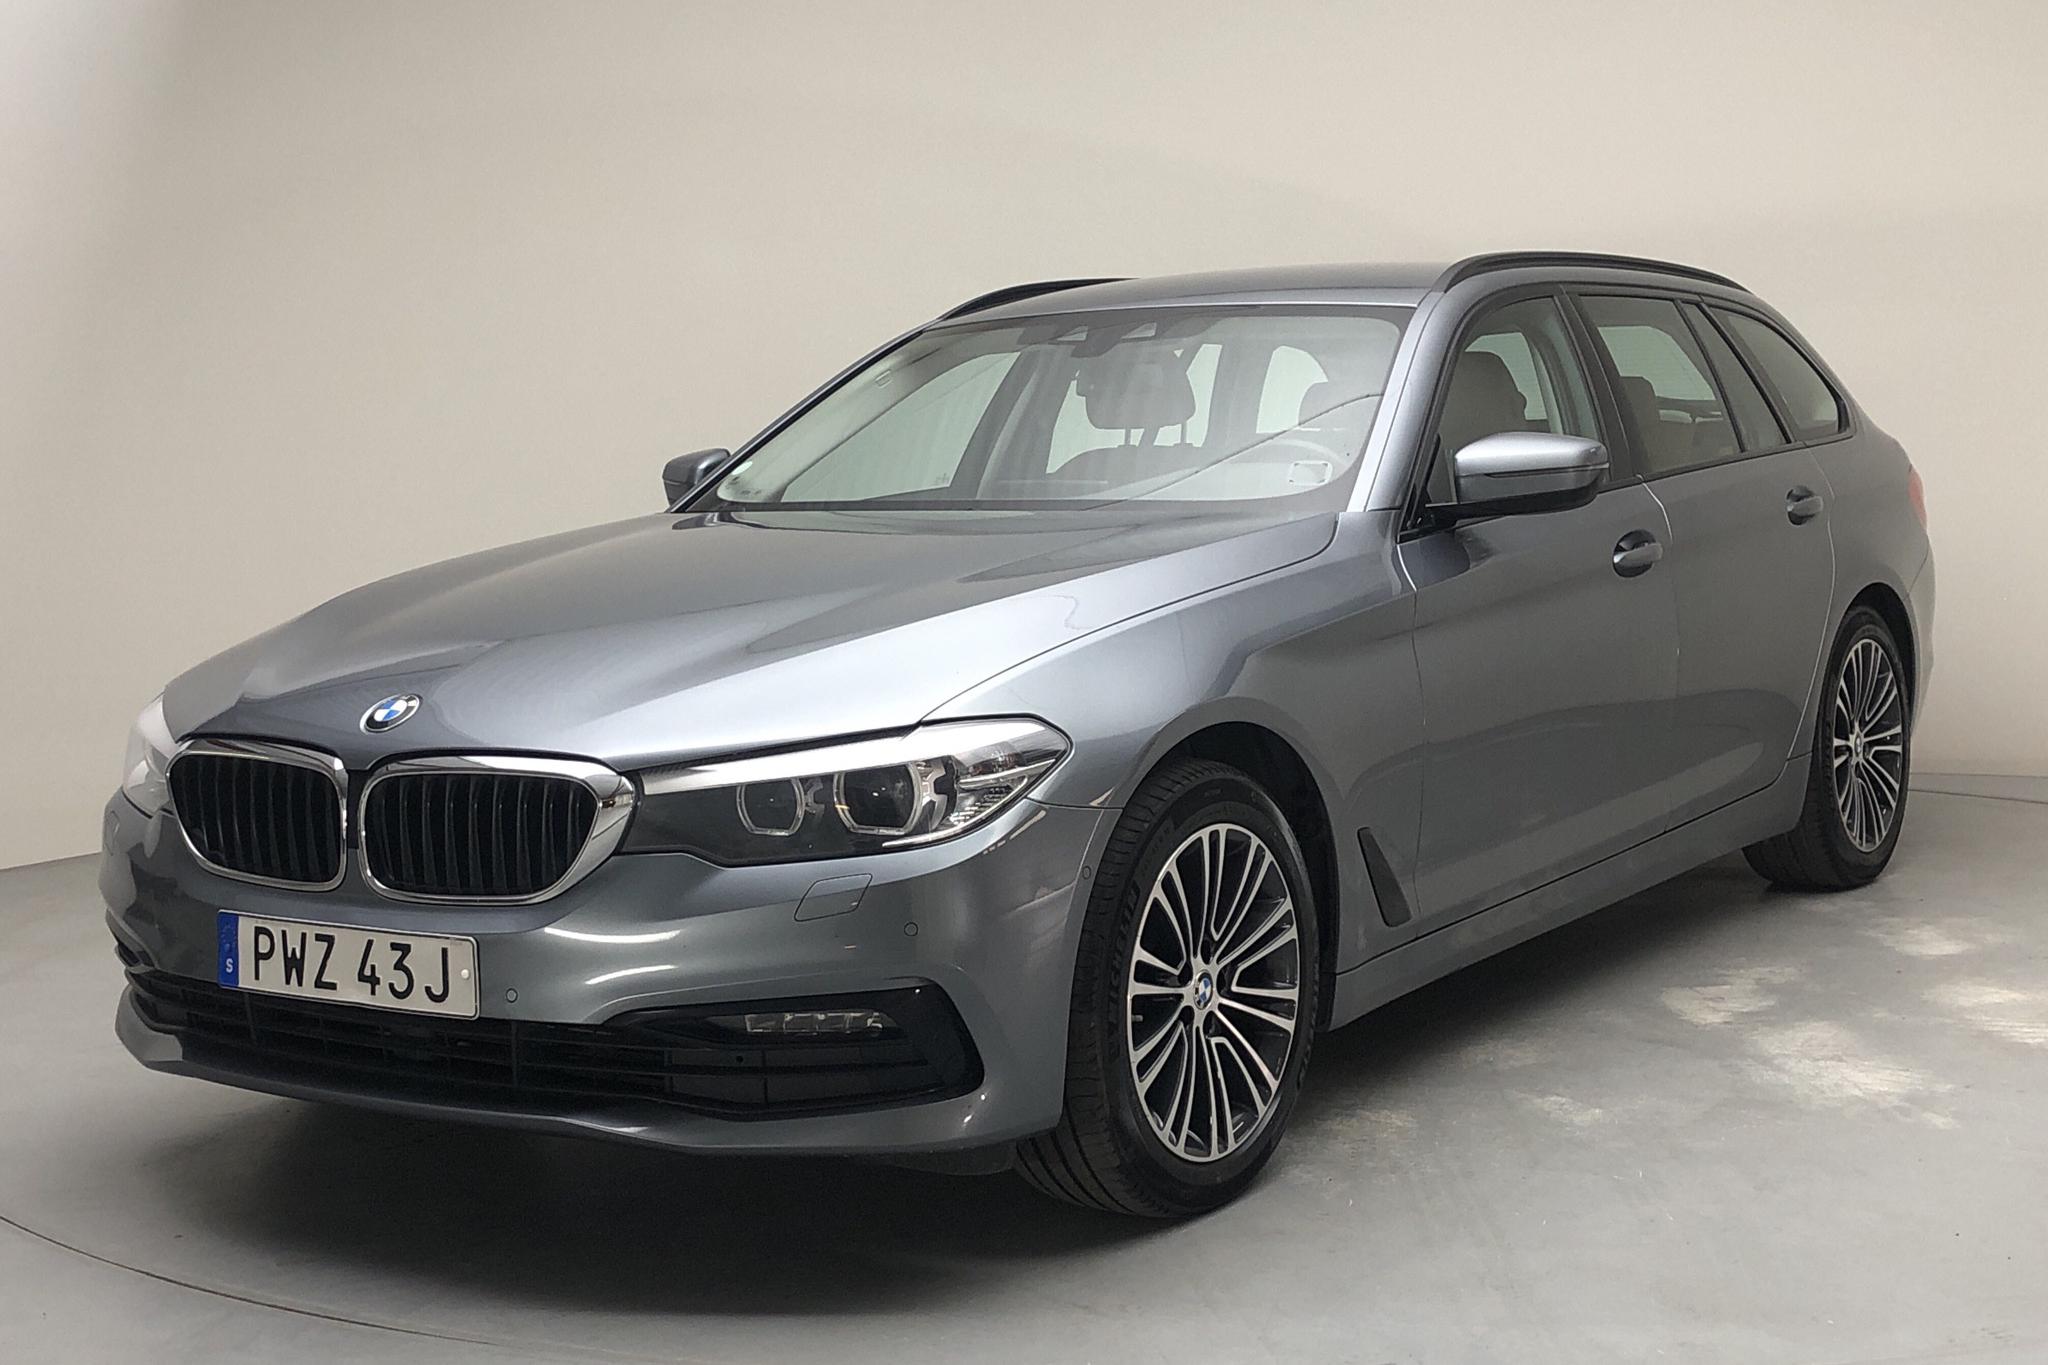 BMW 520d Touring MHEV, G31 (190hk) - 137 380 km - Automatic - blue - 2020